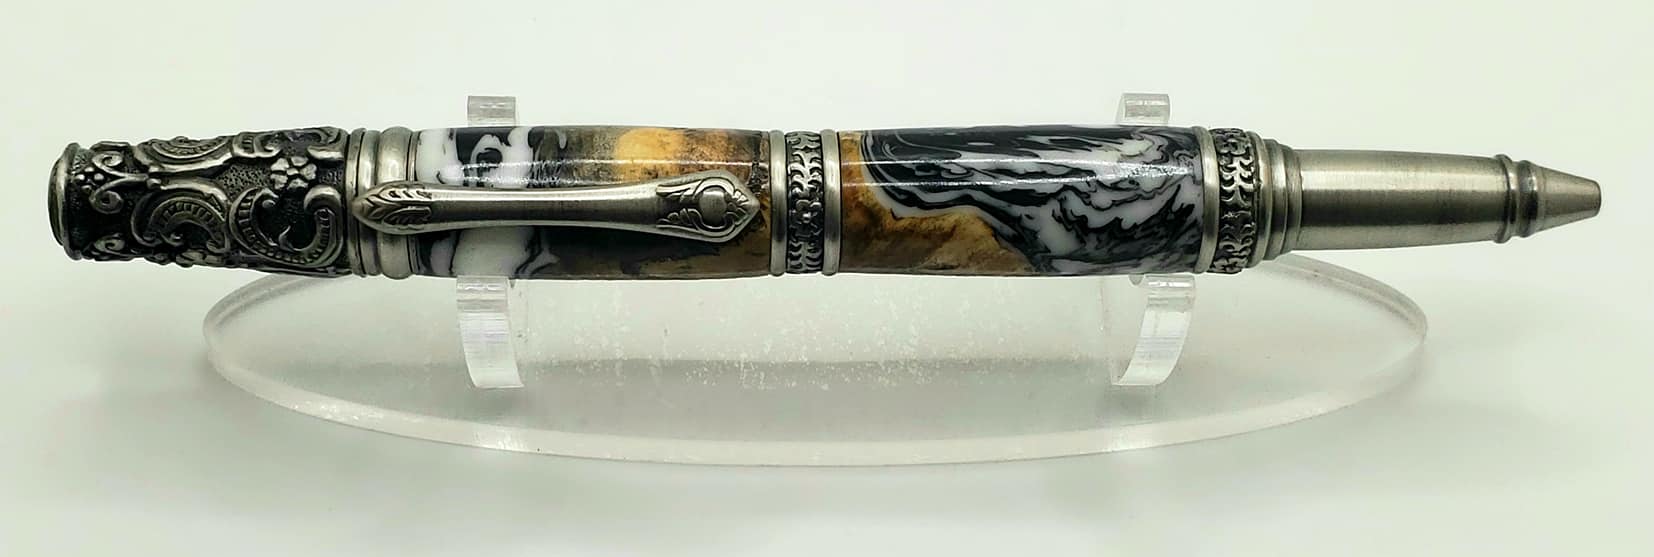 Victorian Pen - Pewter with Buckeye Burl Wood / Black and White Marbled Epoxy Hybrid